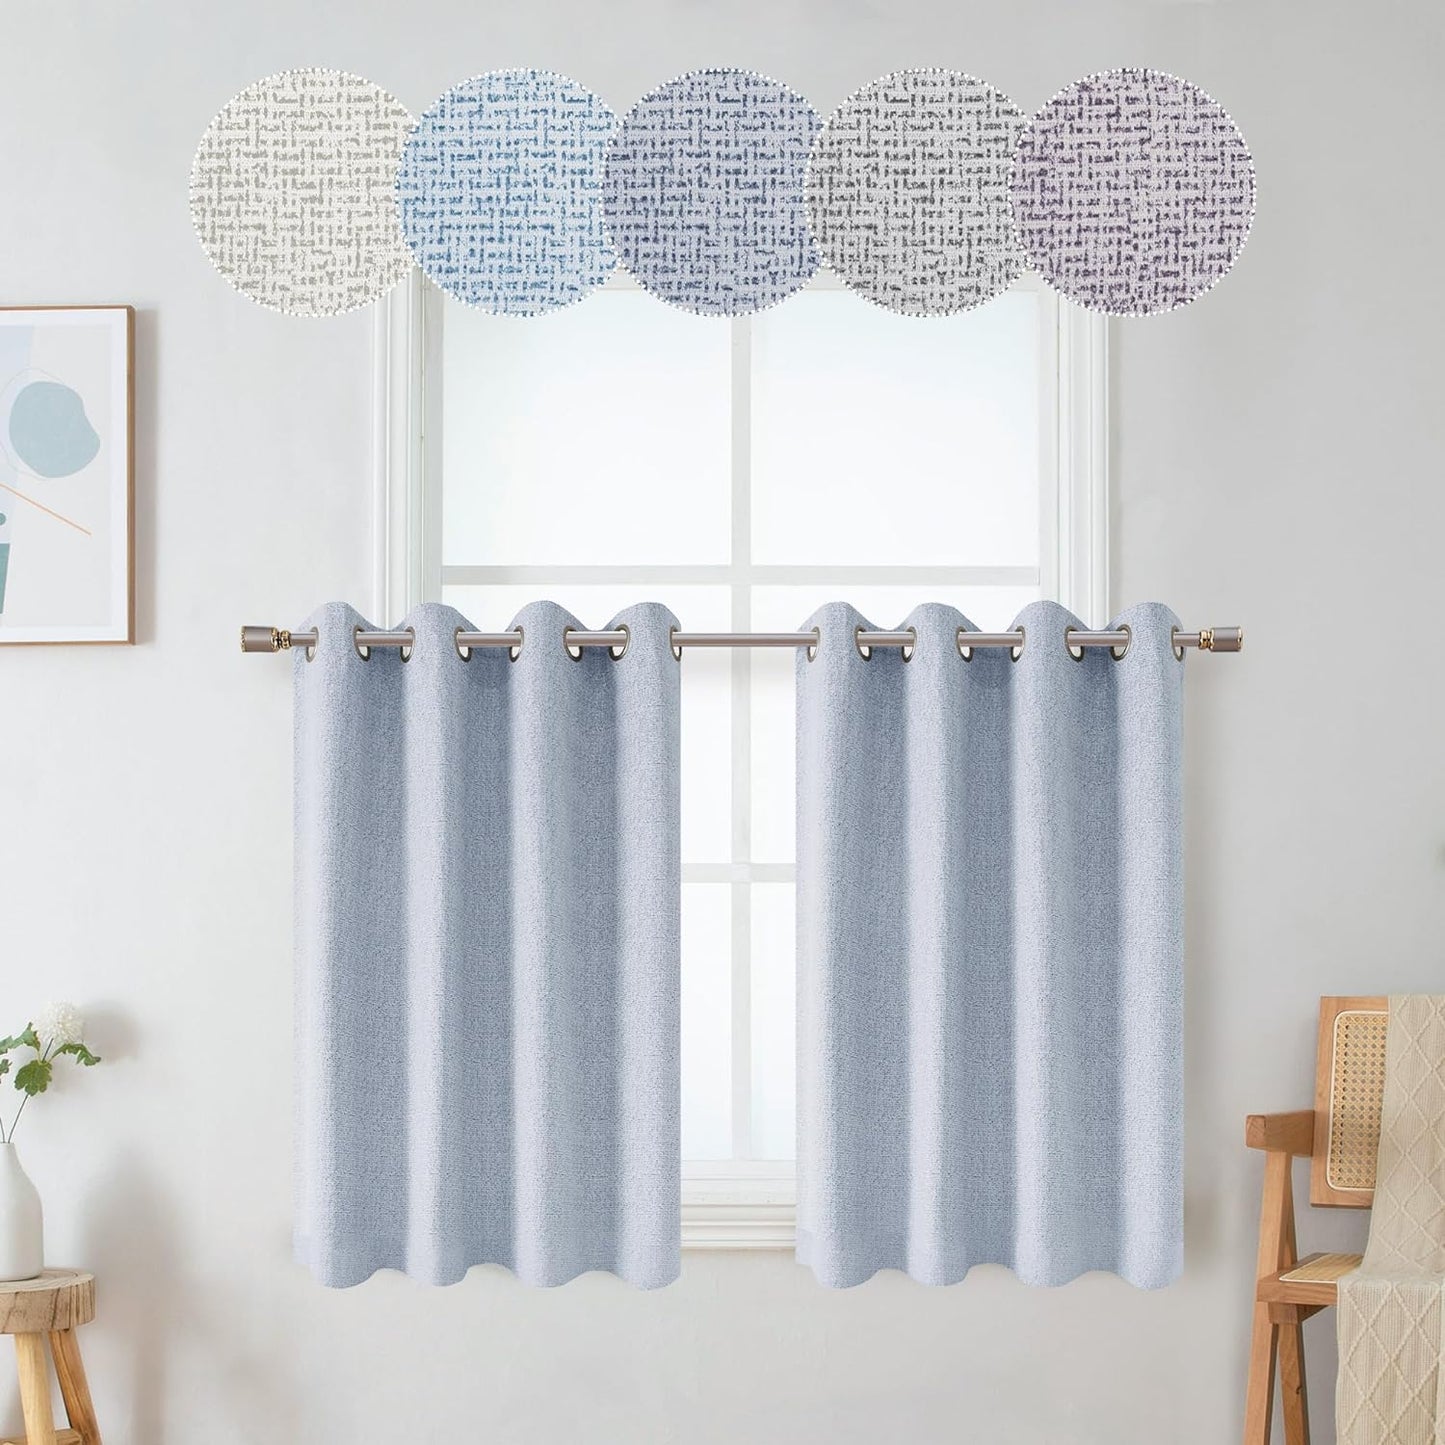 OWENIE Luke Black Out Curtains 63 Inch Long 2 Panels for Bedroom, Geometric Printed Completely Blackout Room Darkening Curtains, Grommet Thermal Insulated Living Room Curtain, 2 PCS, Each 42Wx63L Inch  OWENIE Light Blue 42"W X 36"L | 2 Pcs 